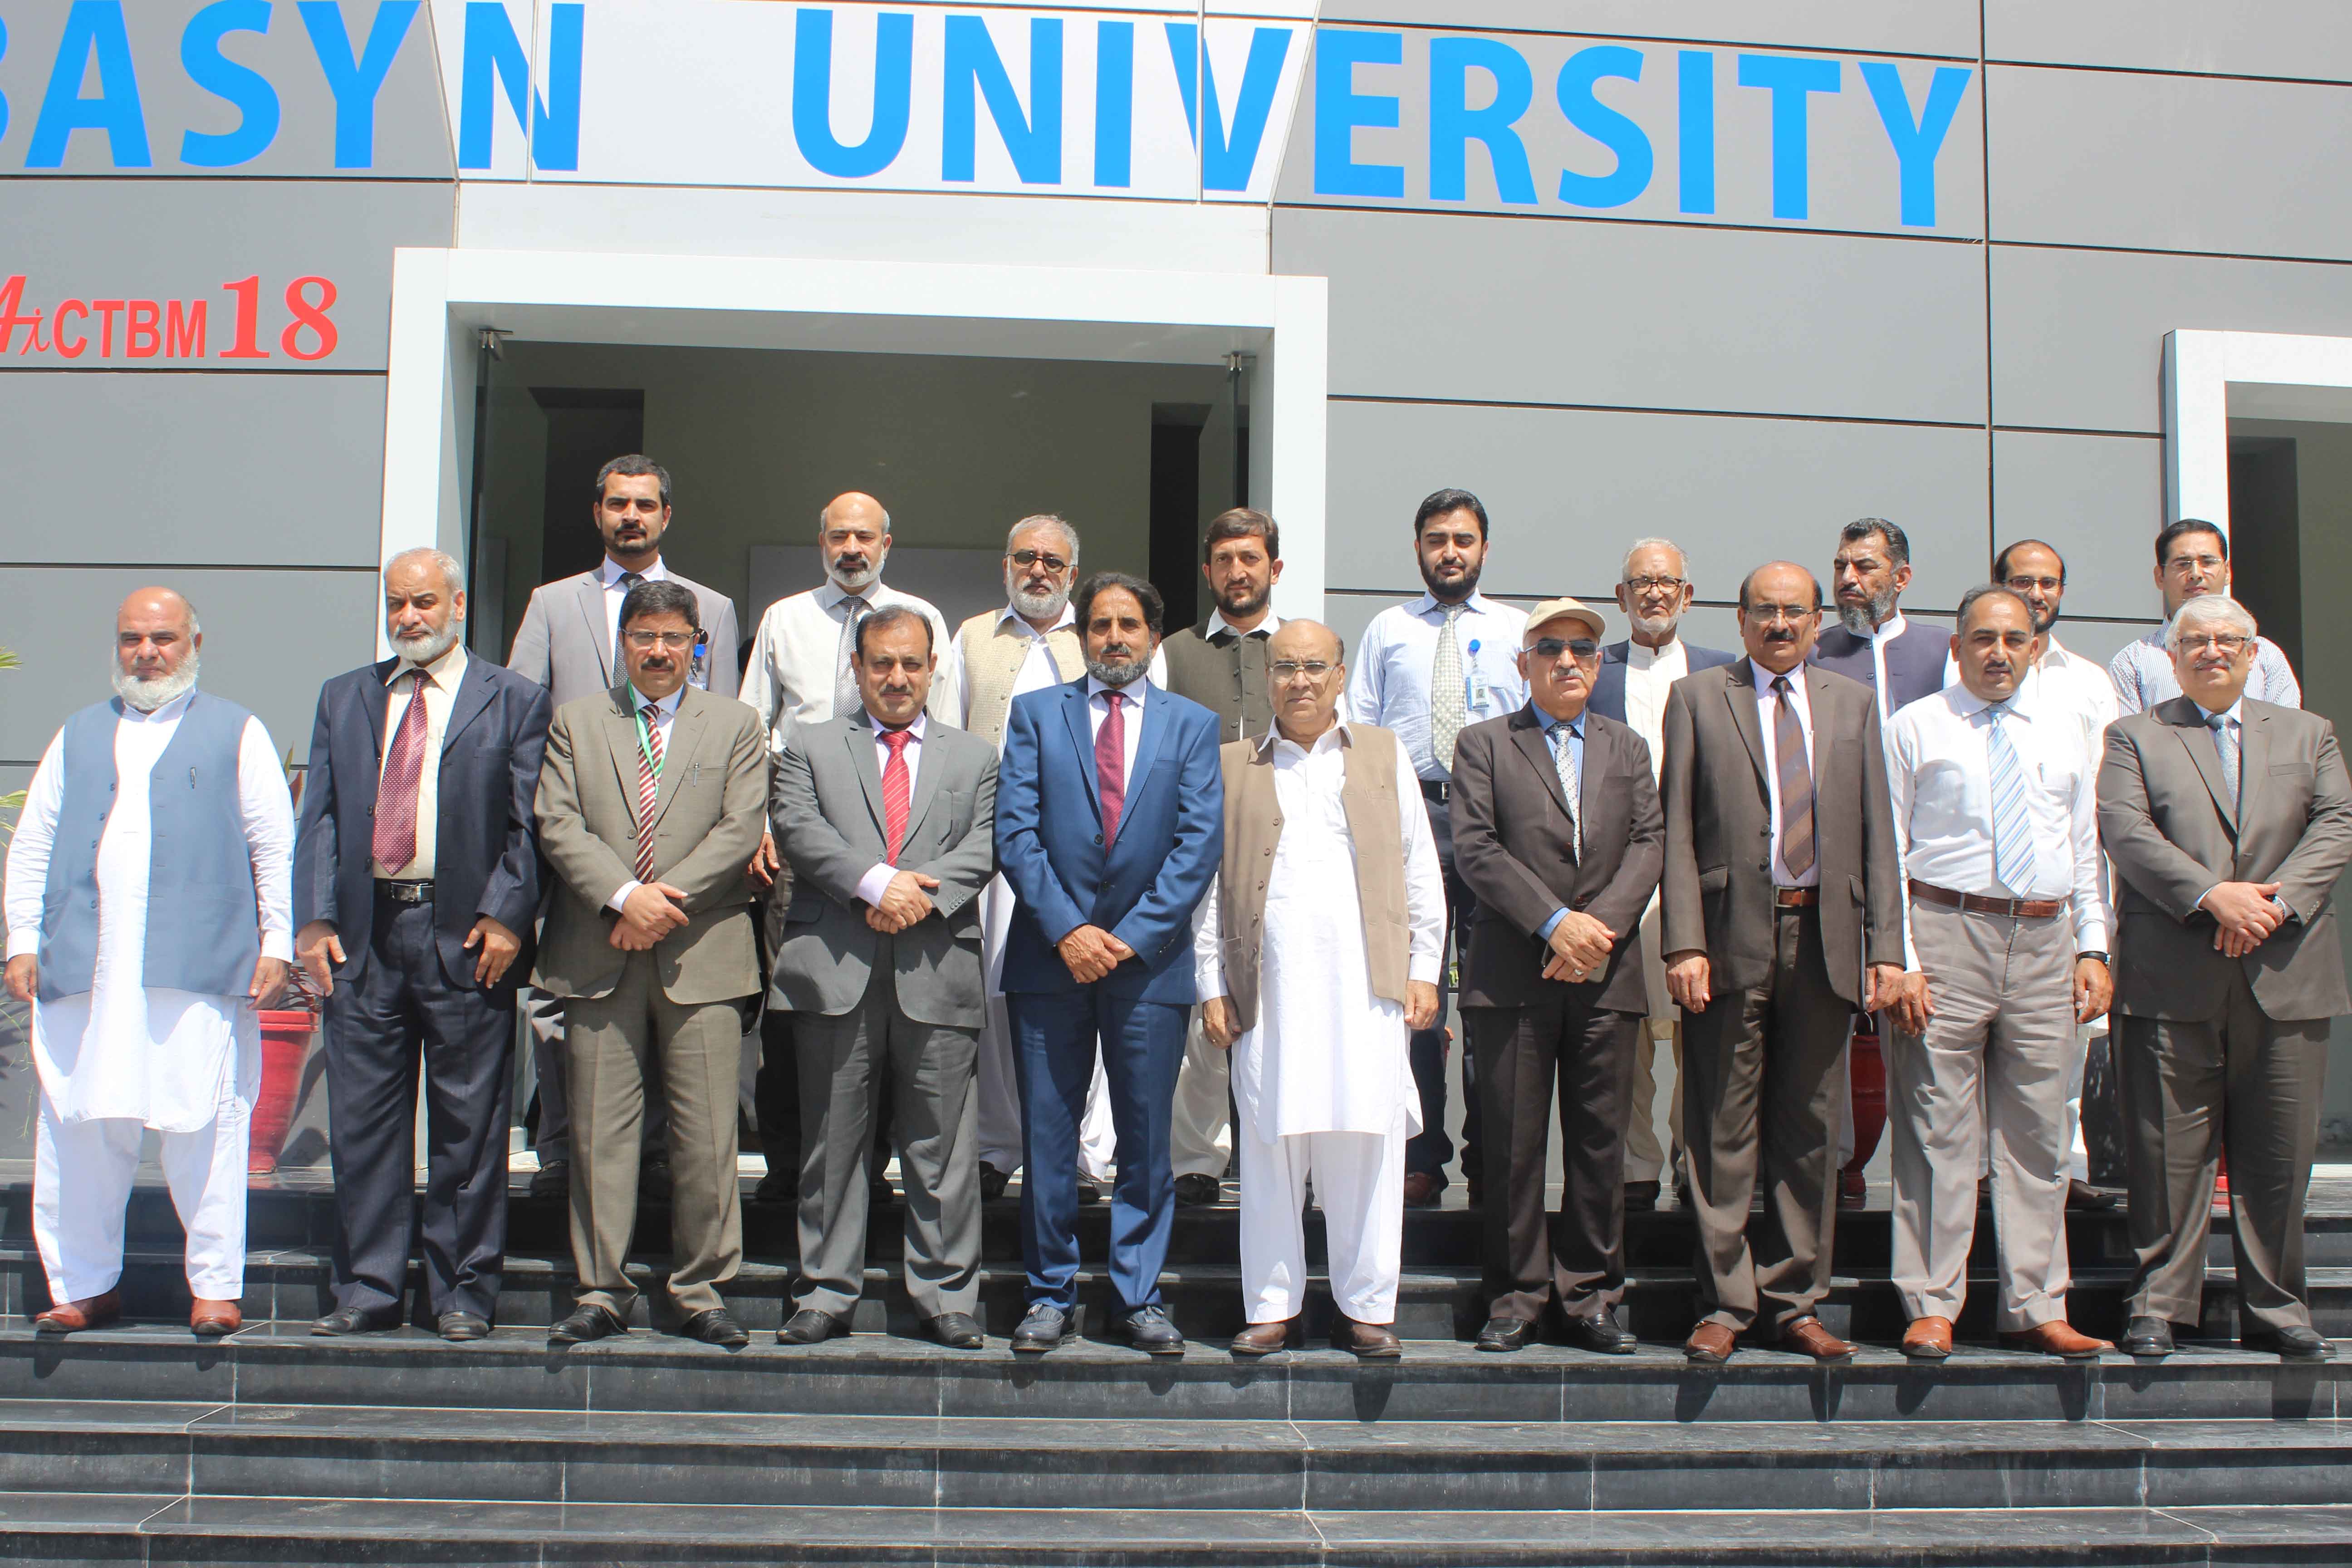 Group Photo of honorable  VCs from different universities with chief guest Dr. Jamil Ahmad, Chancellor Muhammad Imran Ullah (Abasyn University) and Vice Chancellor Dr. Syed Umar Farooq